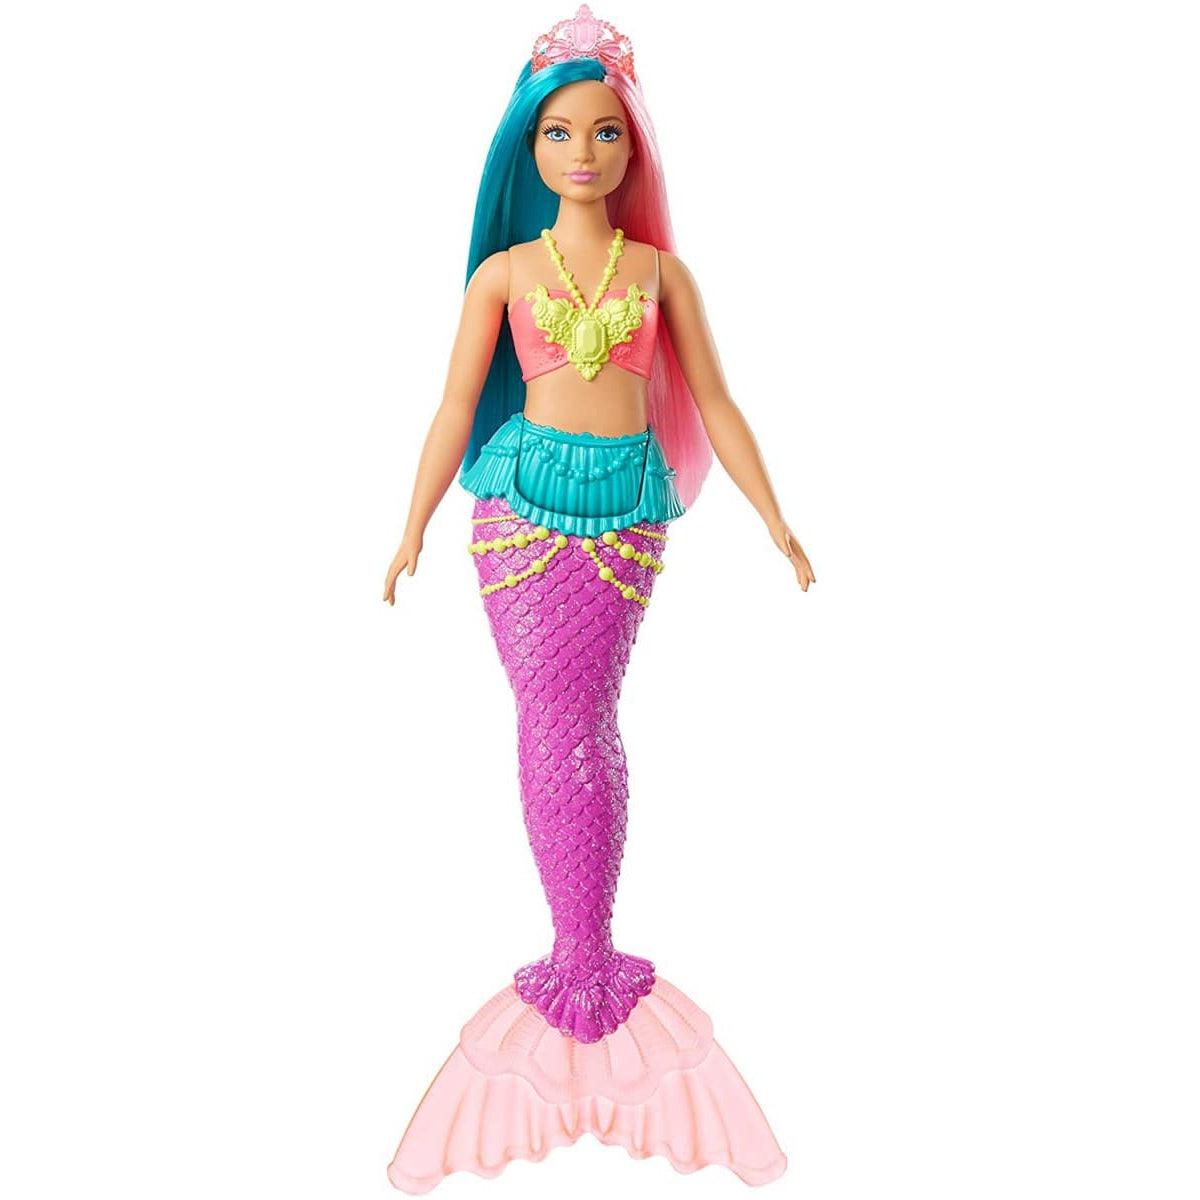 Mattel-Barbie Dreamtopia Doll - Assorted Styles - Mermaid-GJK11-Teal and Pink Hair with Tiara-Legacy Toys